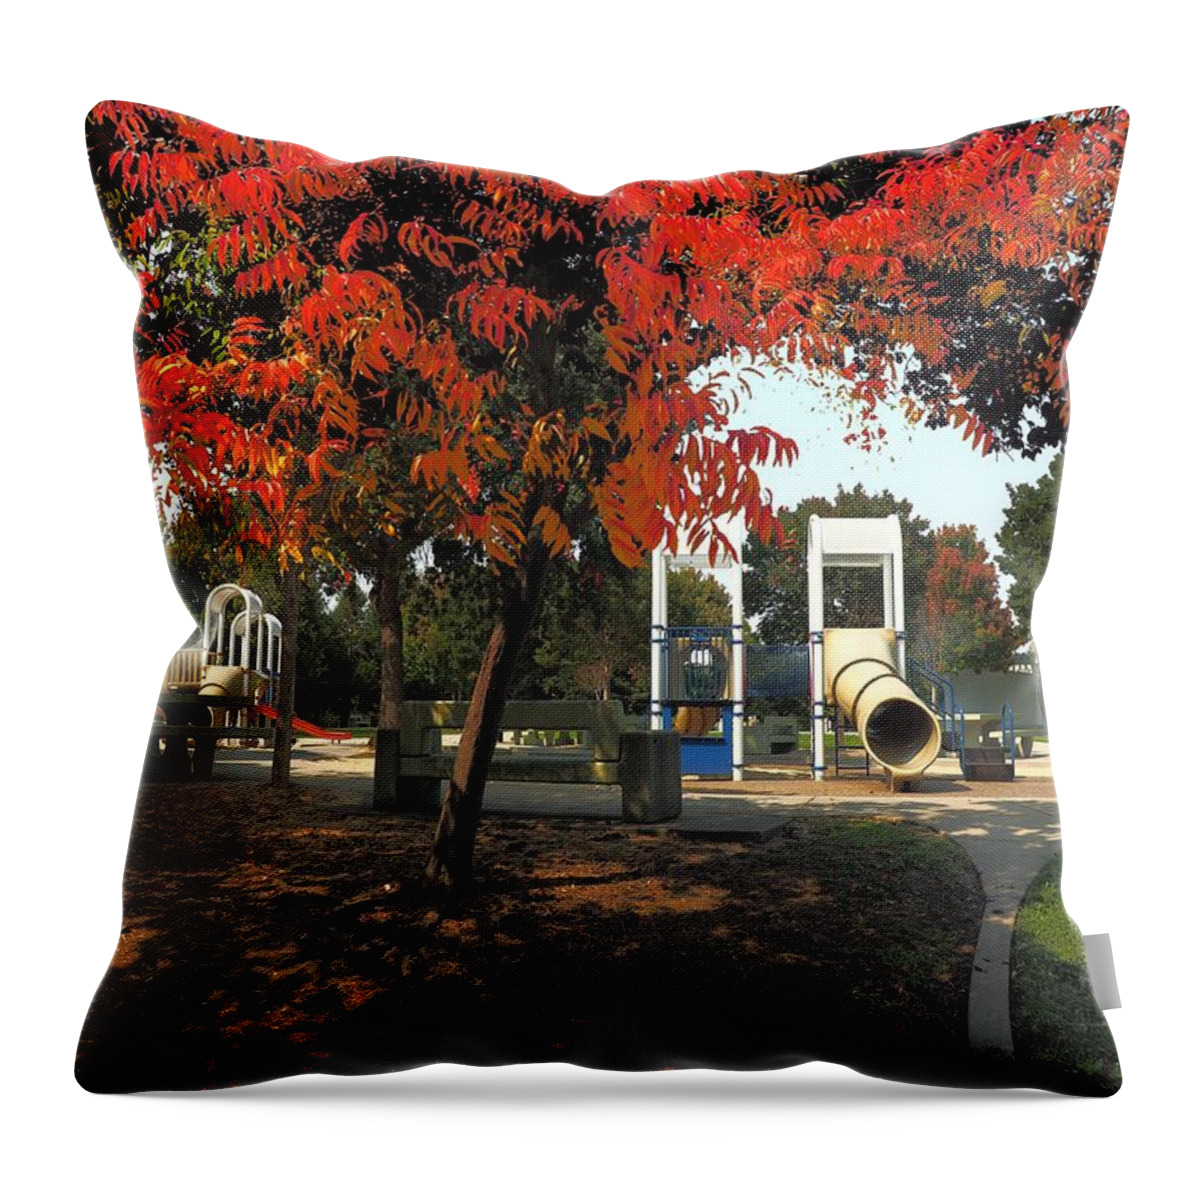 Digital Painting Throw Pillow featuring the photograph Autumn Park Diversity by Richard Thomas